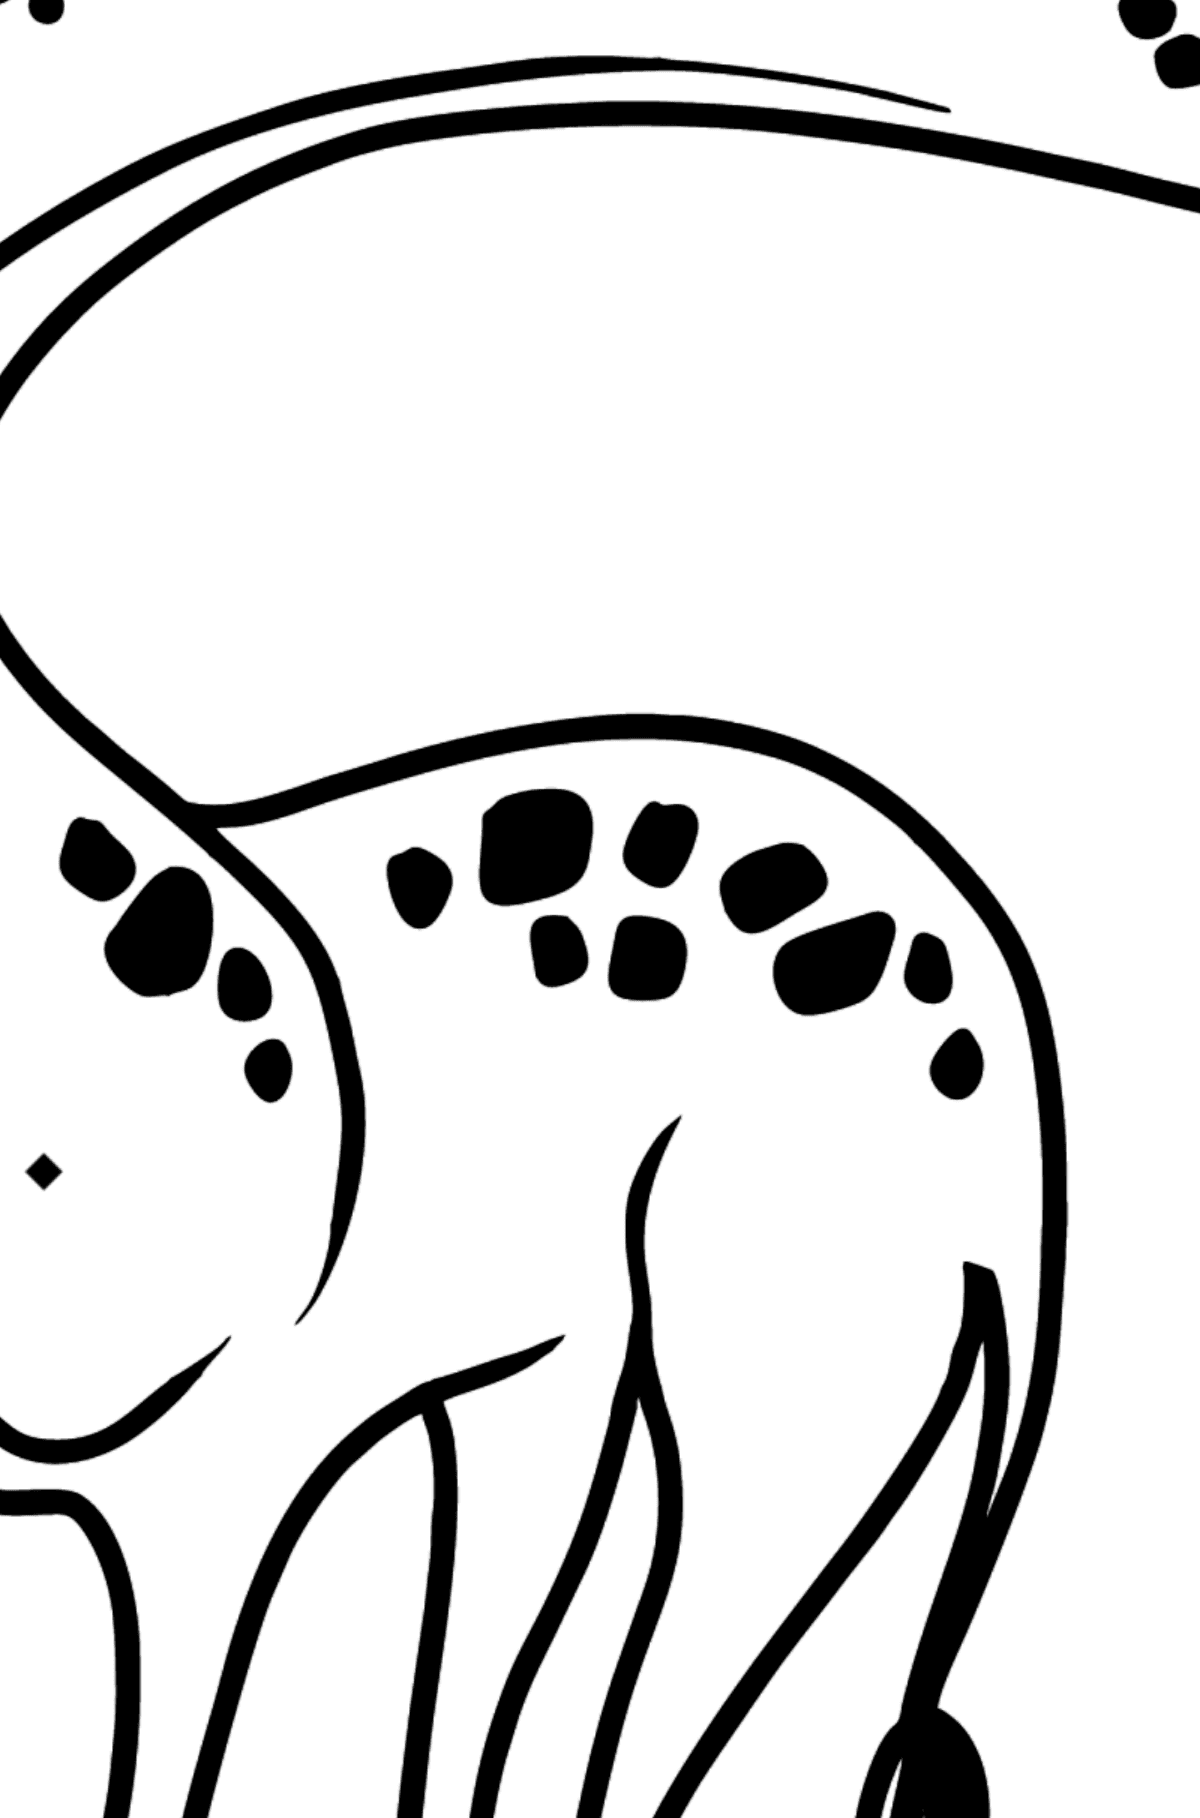 Giraffe coloring page - Coloring by Symbols and Geometric Shapes for Kids